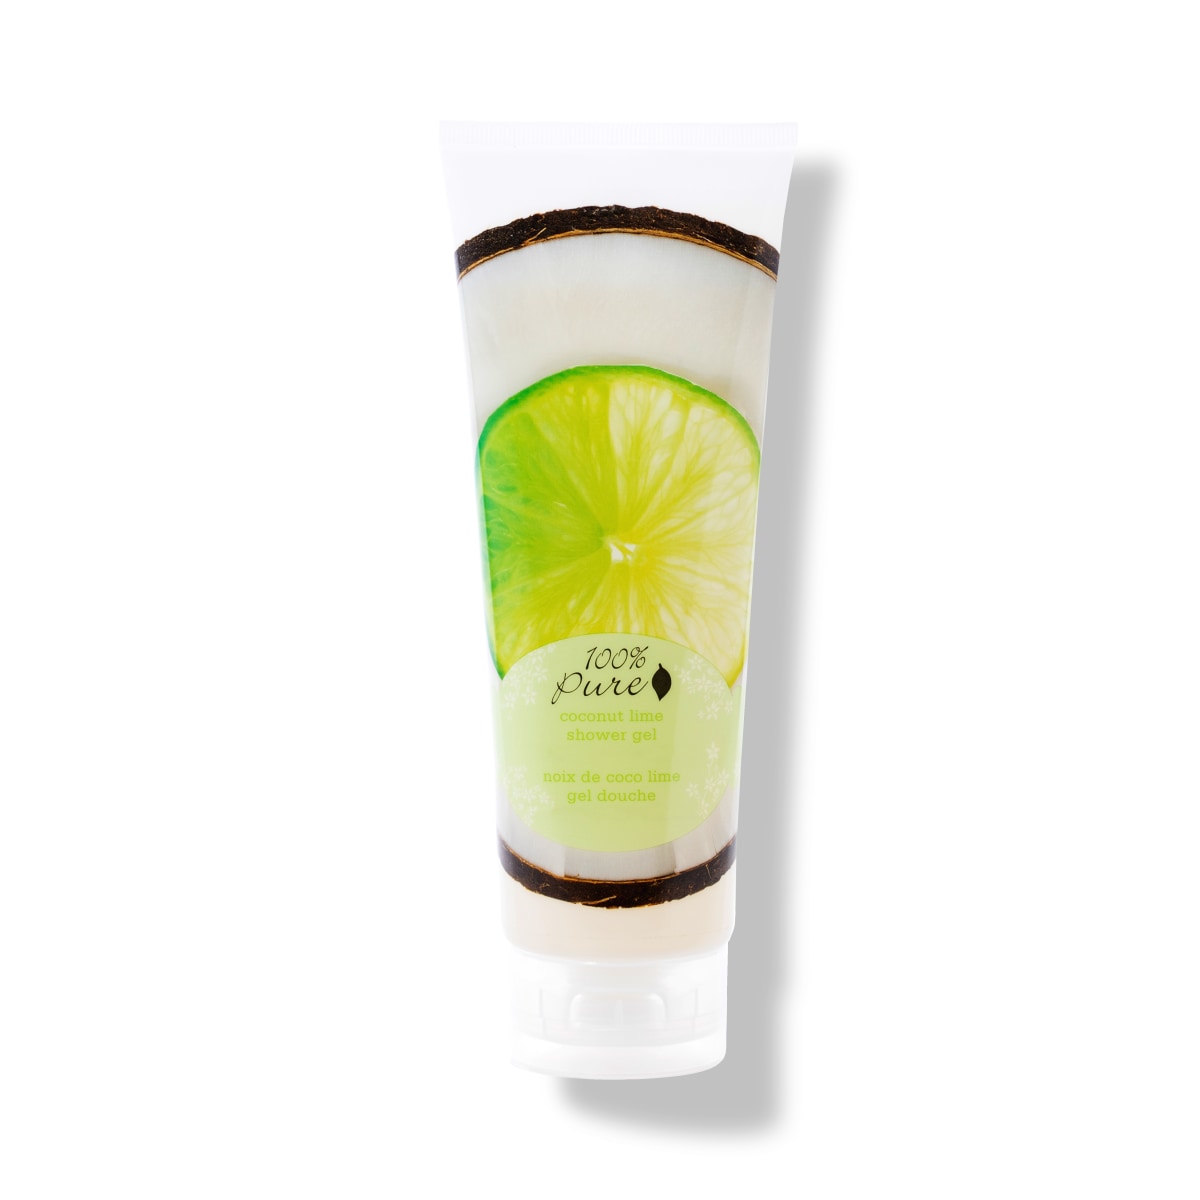 100% PURE® Coconut Lime Shower Gel at Socialite Beauty Canada